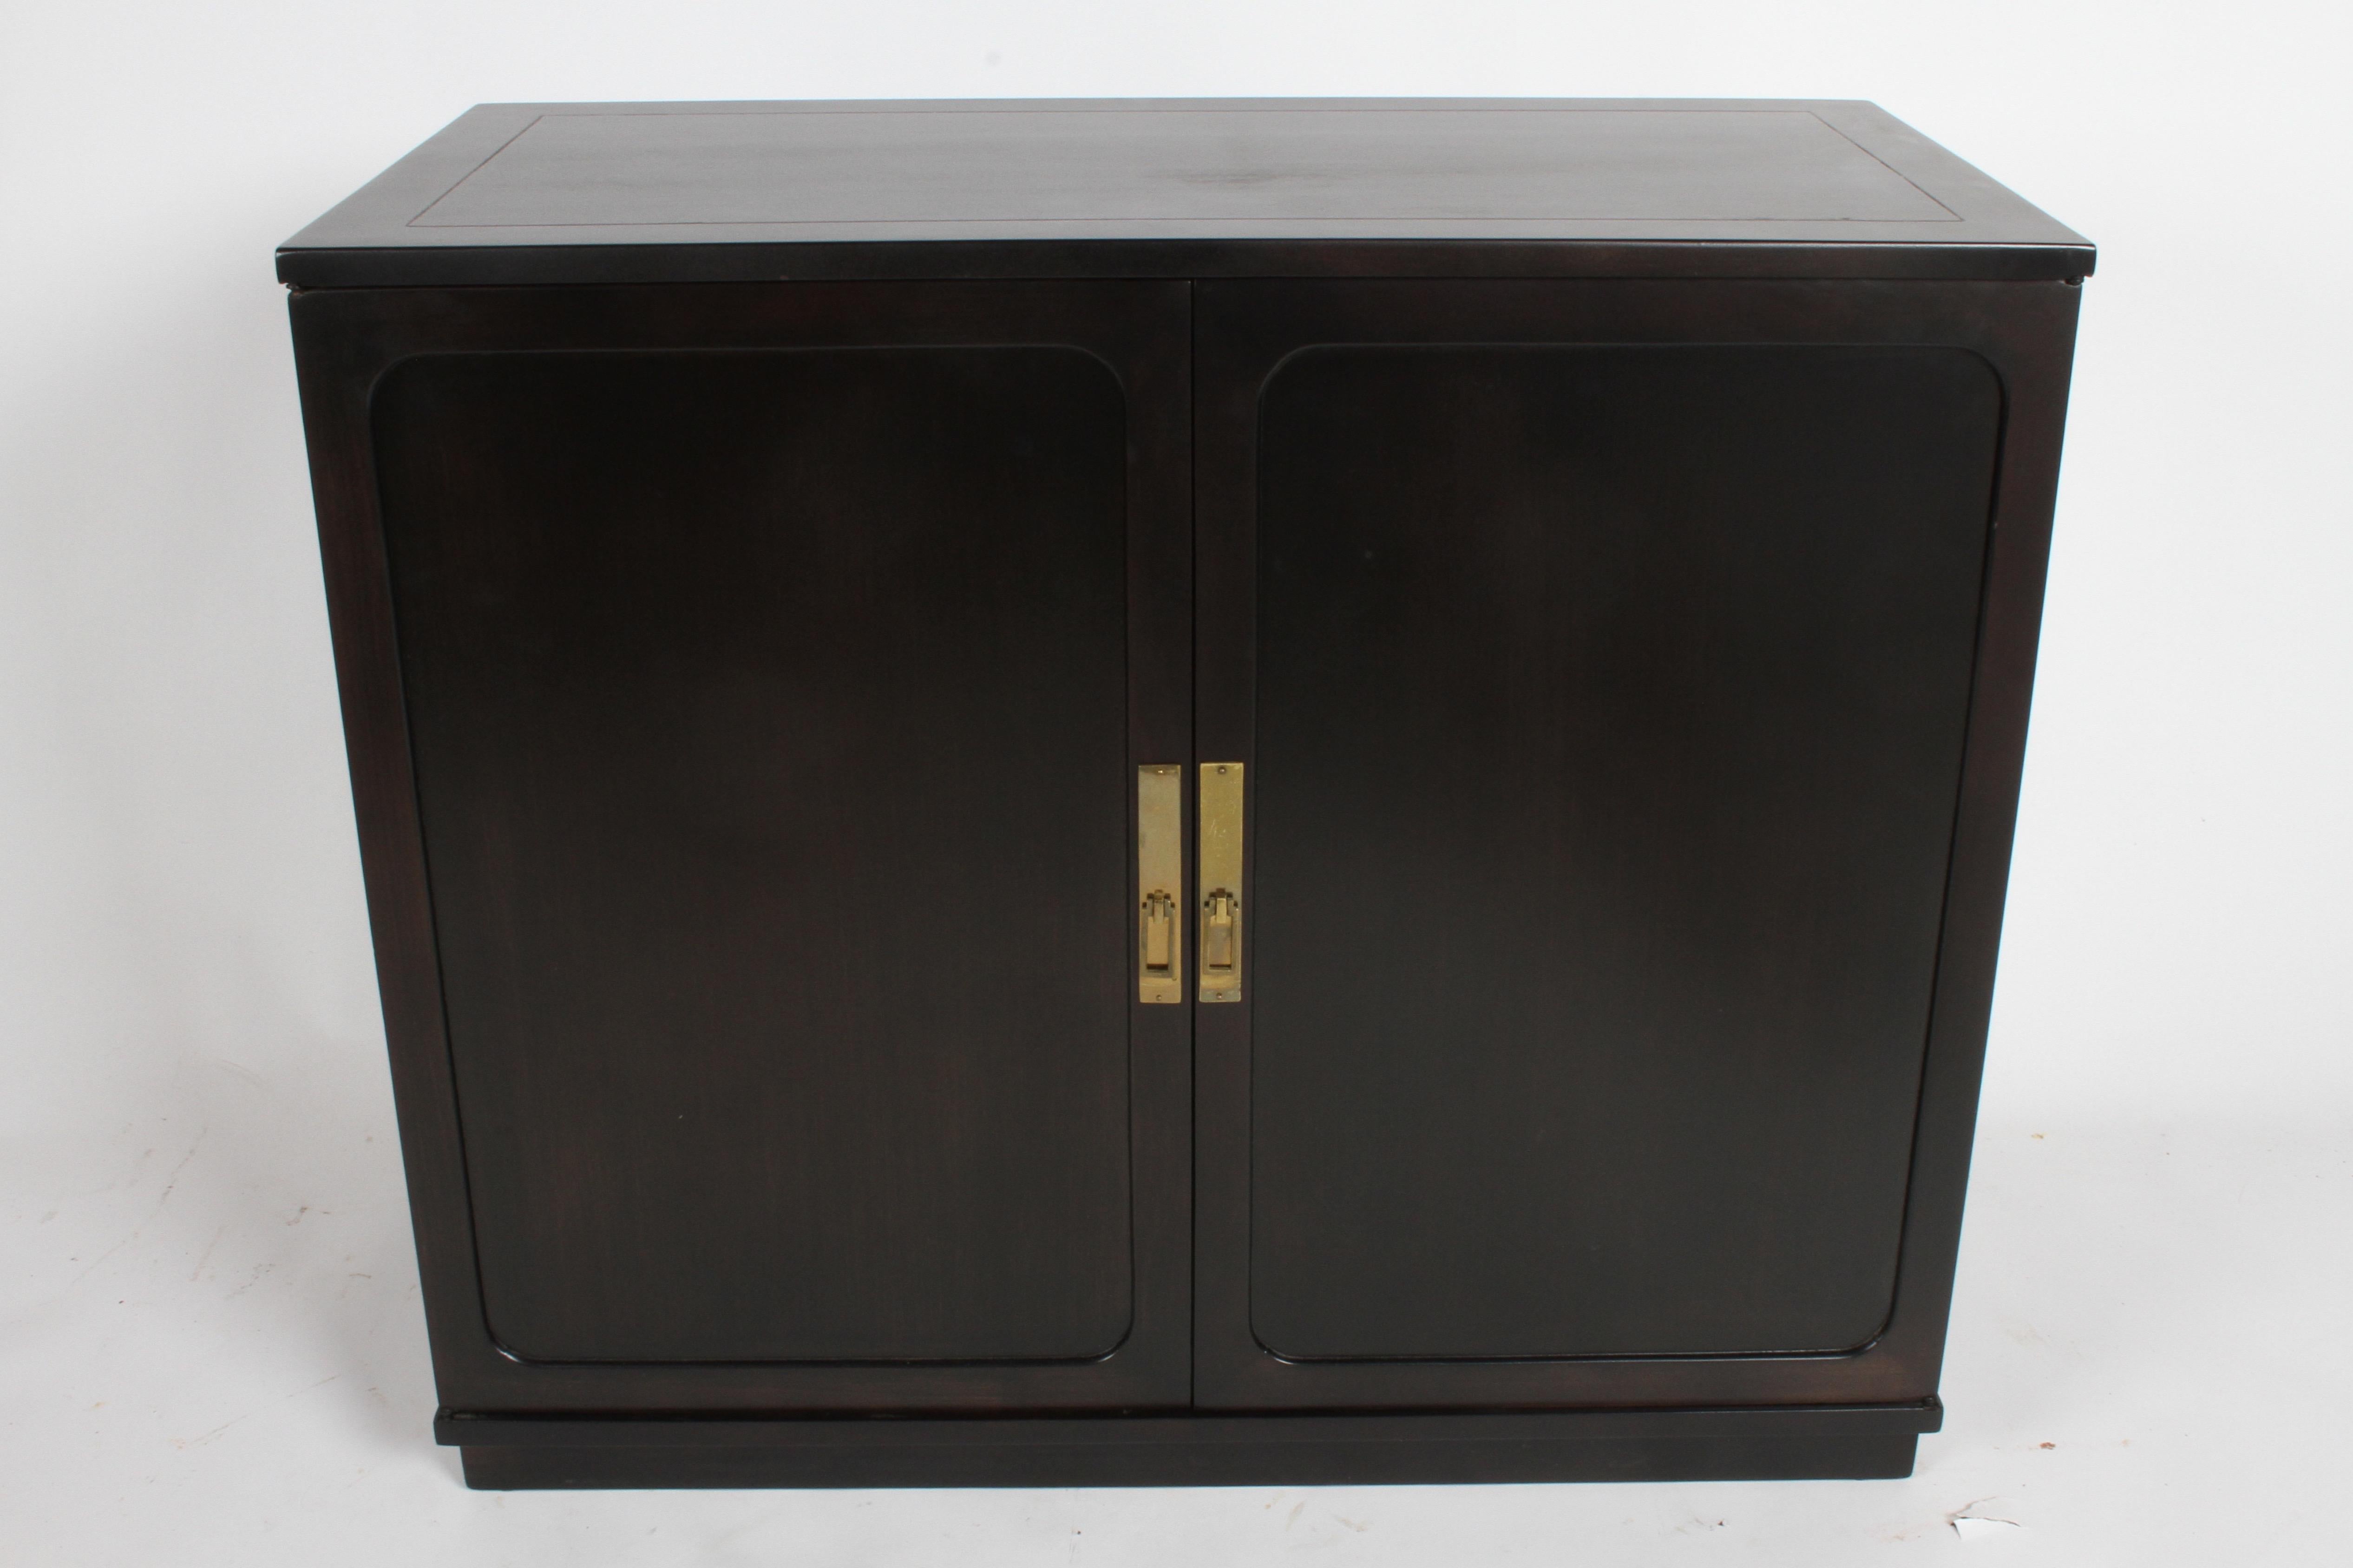 Edward Wormley two-door cabinet in ebonized silver elm with brass hardware, circa 1948. The one shown has recently sold, but have another with slightly different hardware available, please inquire. Interior has two sliding drawers over open space.